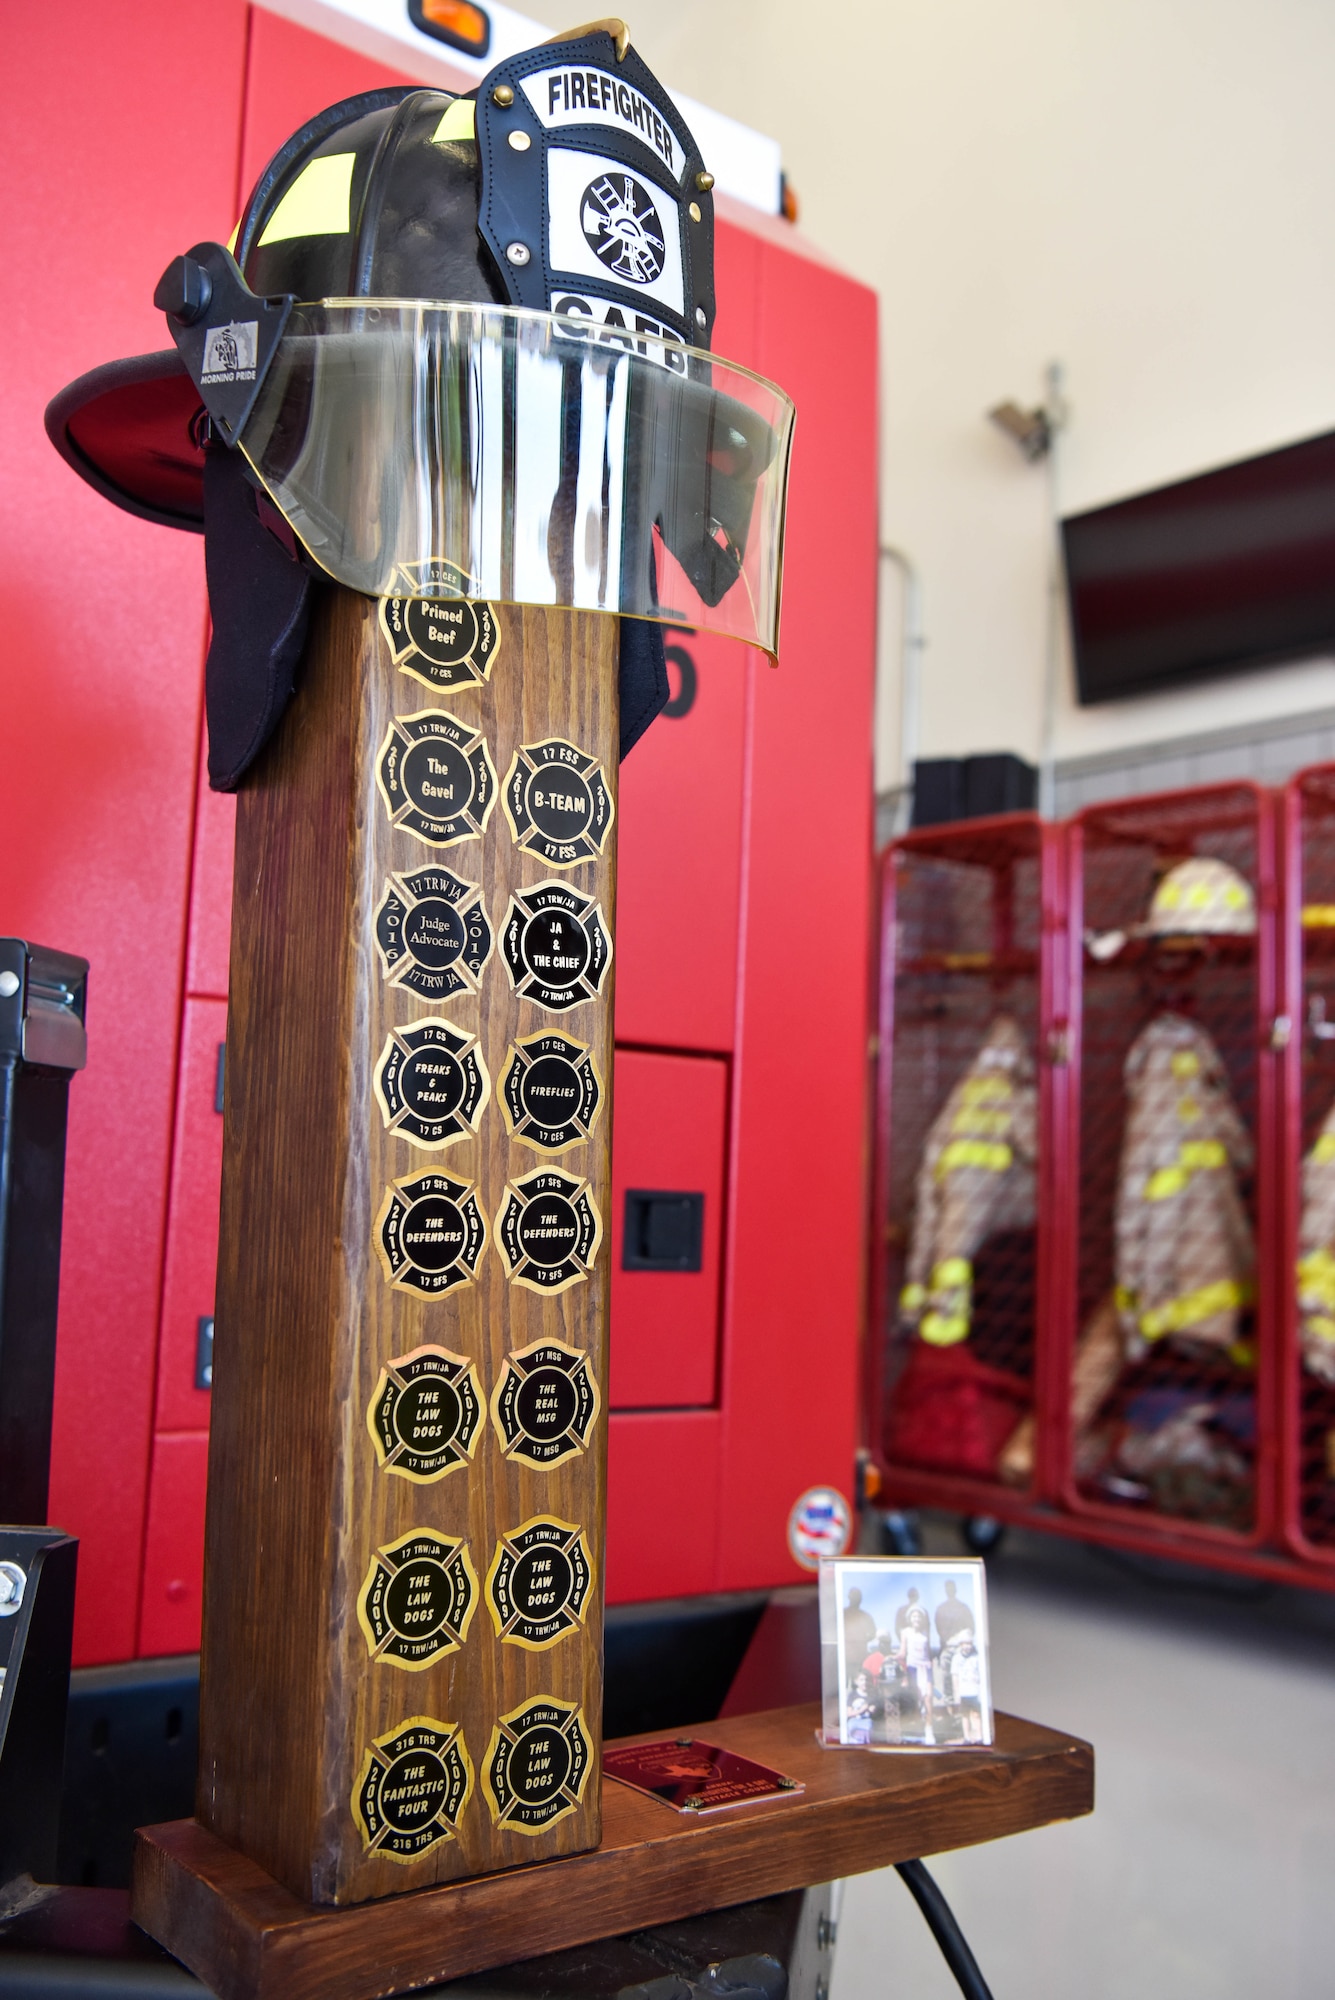 The Fire Muster Challenger Trophy rests in the Goodfellow Fire Department during the Annual Fire Muster Challenge on Goodfellow Air Force Base, Texas, Oct. 8, 2021. The 17th Civil Engineer Squadron competed the course with a winning time of 4:37:00. (U.S. Air Force photo by Senior Airman Jermaine Ayers)